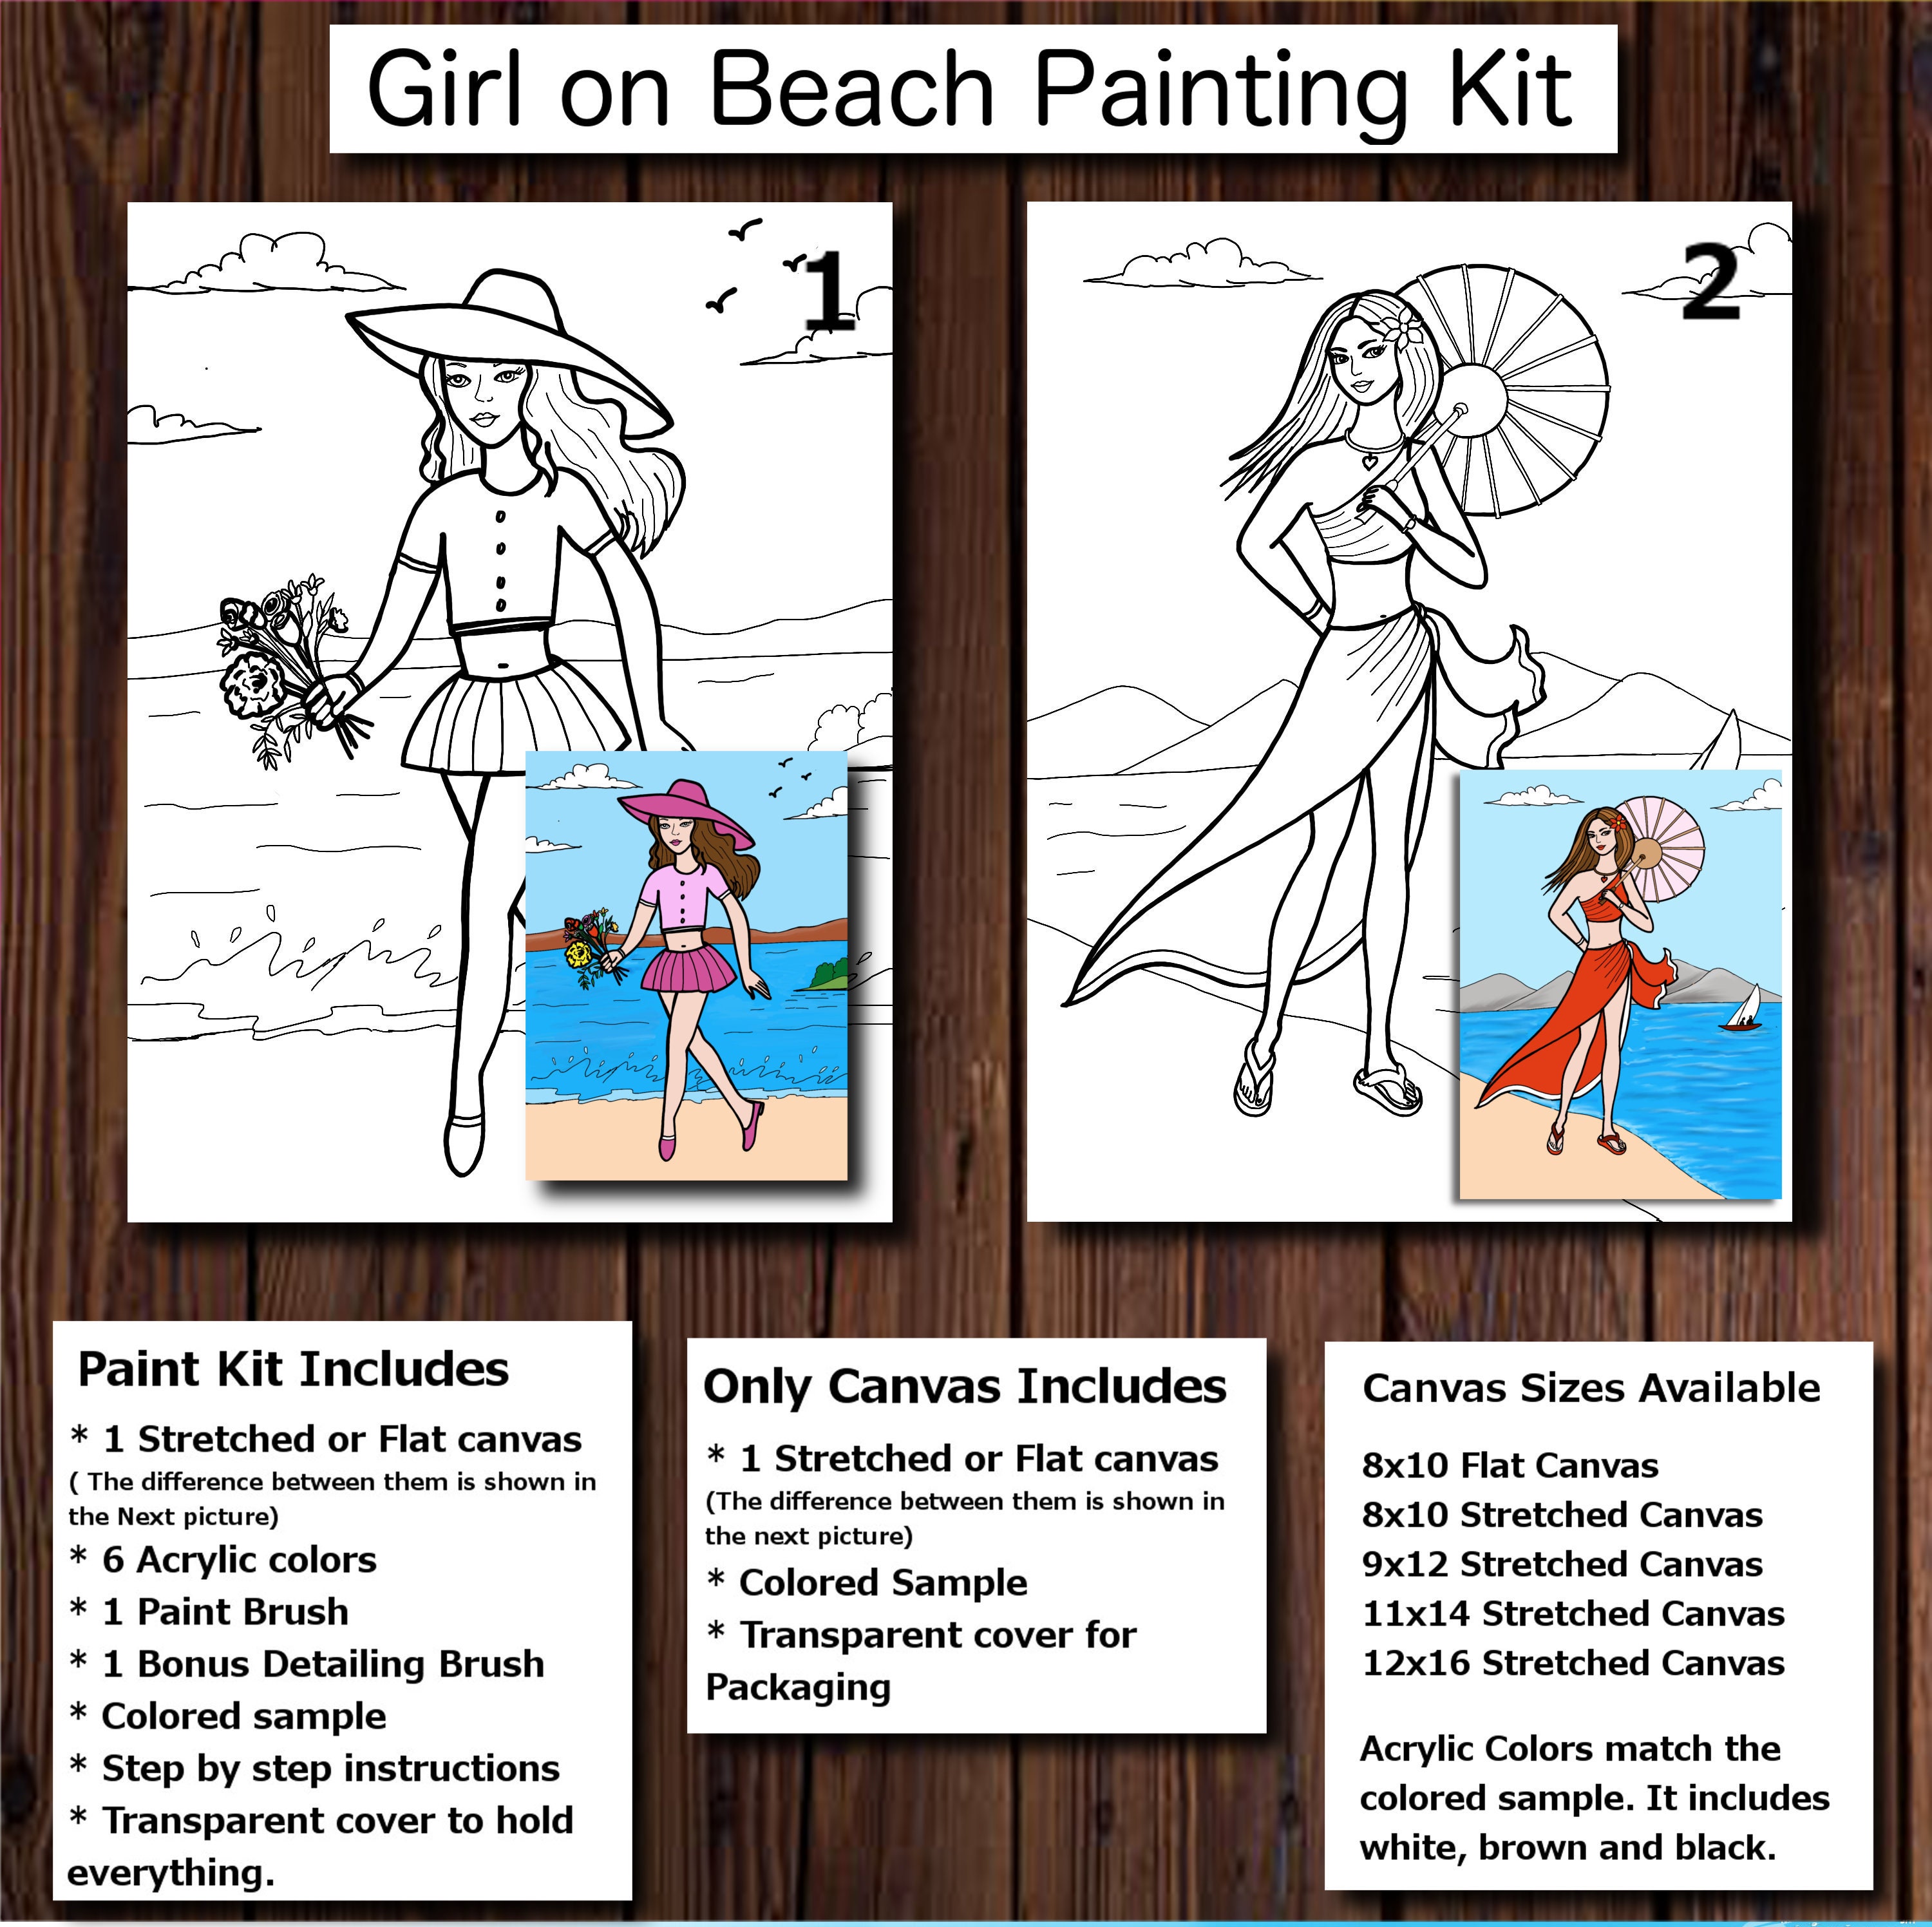 12x16 Lg Canvas Painting Kit Pick 1: Hand Drawn/12 X 16 Canvas/sip &  Paint/birthday Party/diy Paint 